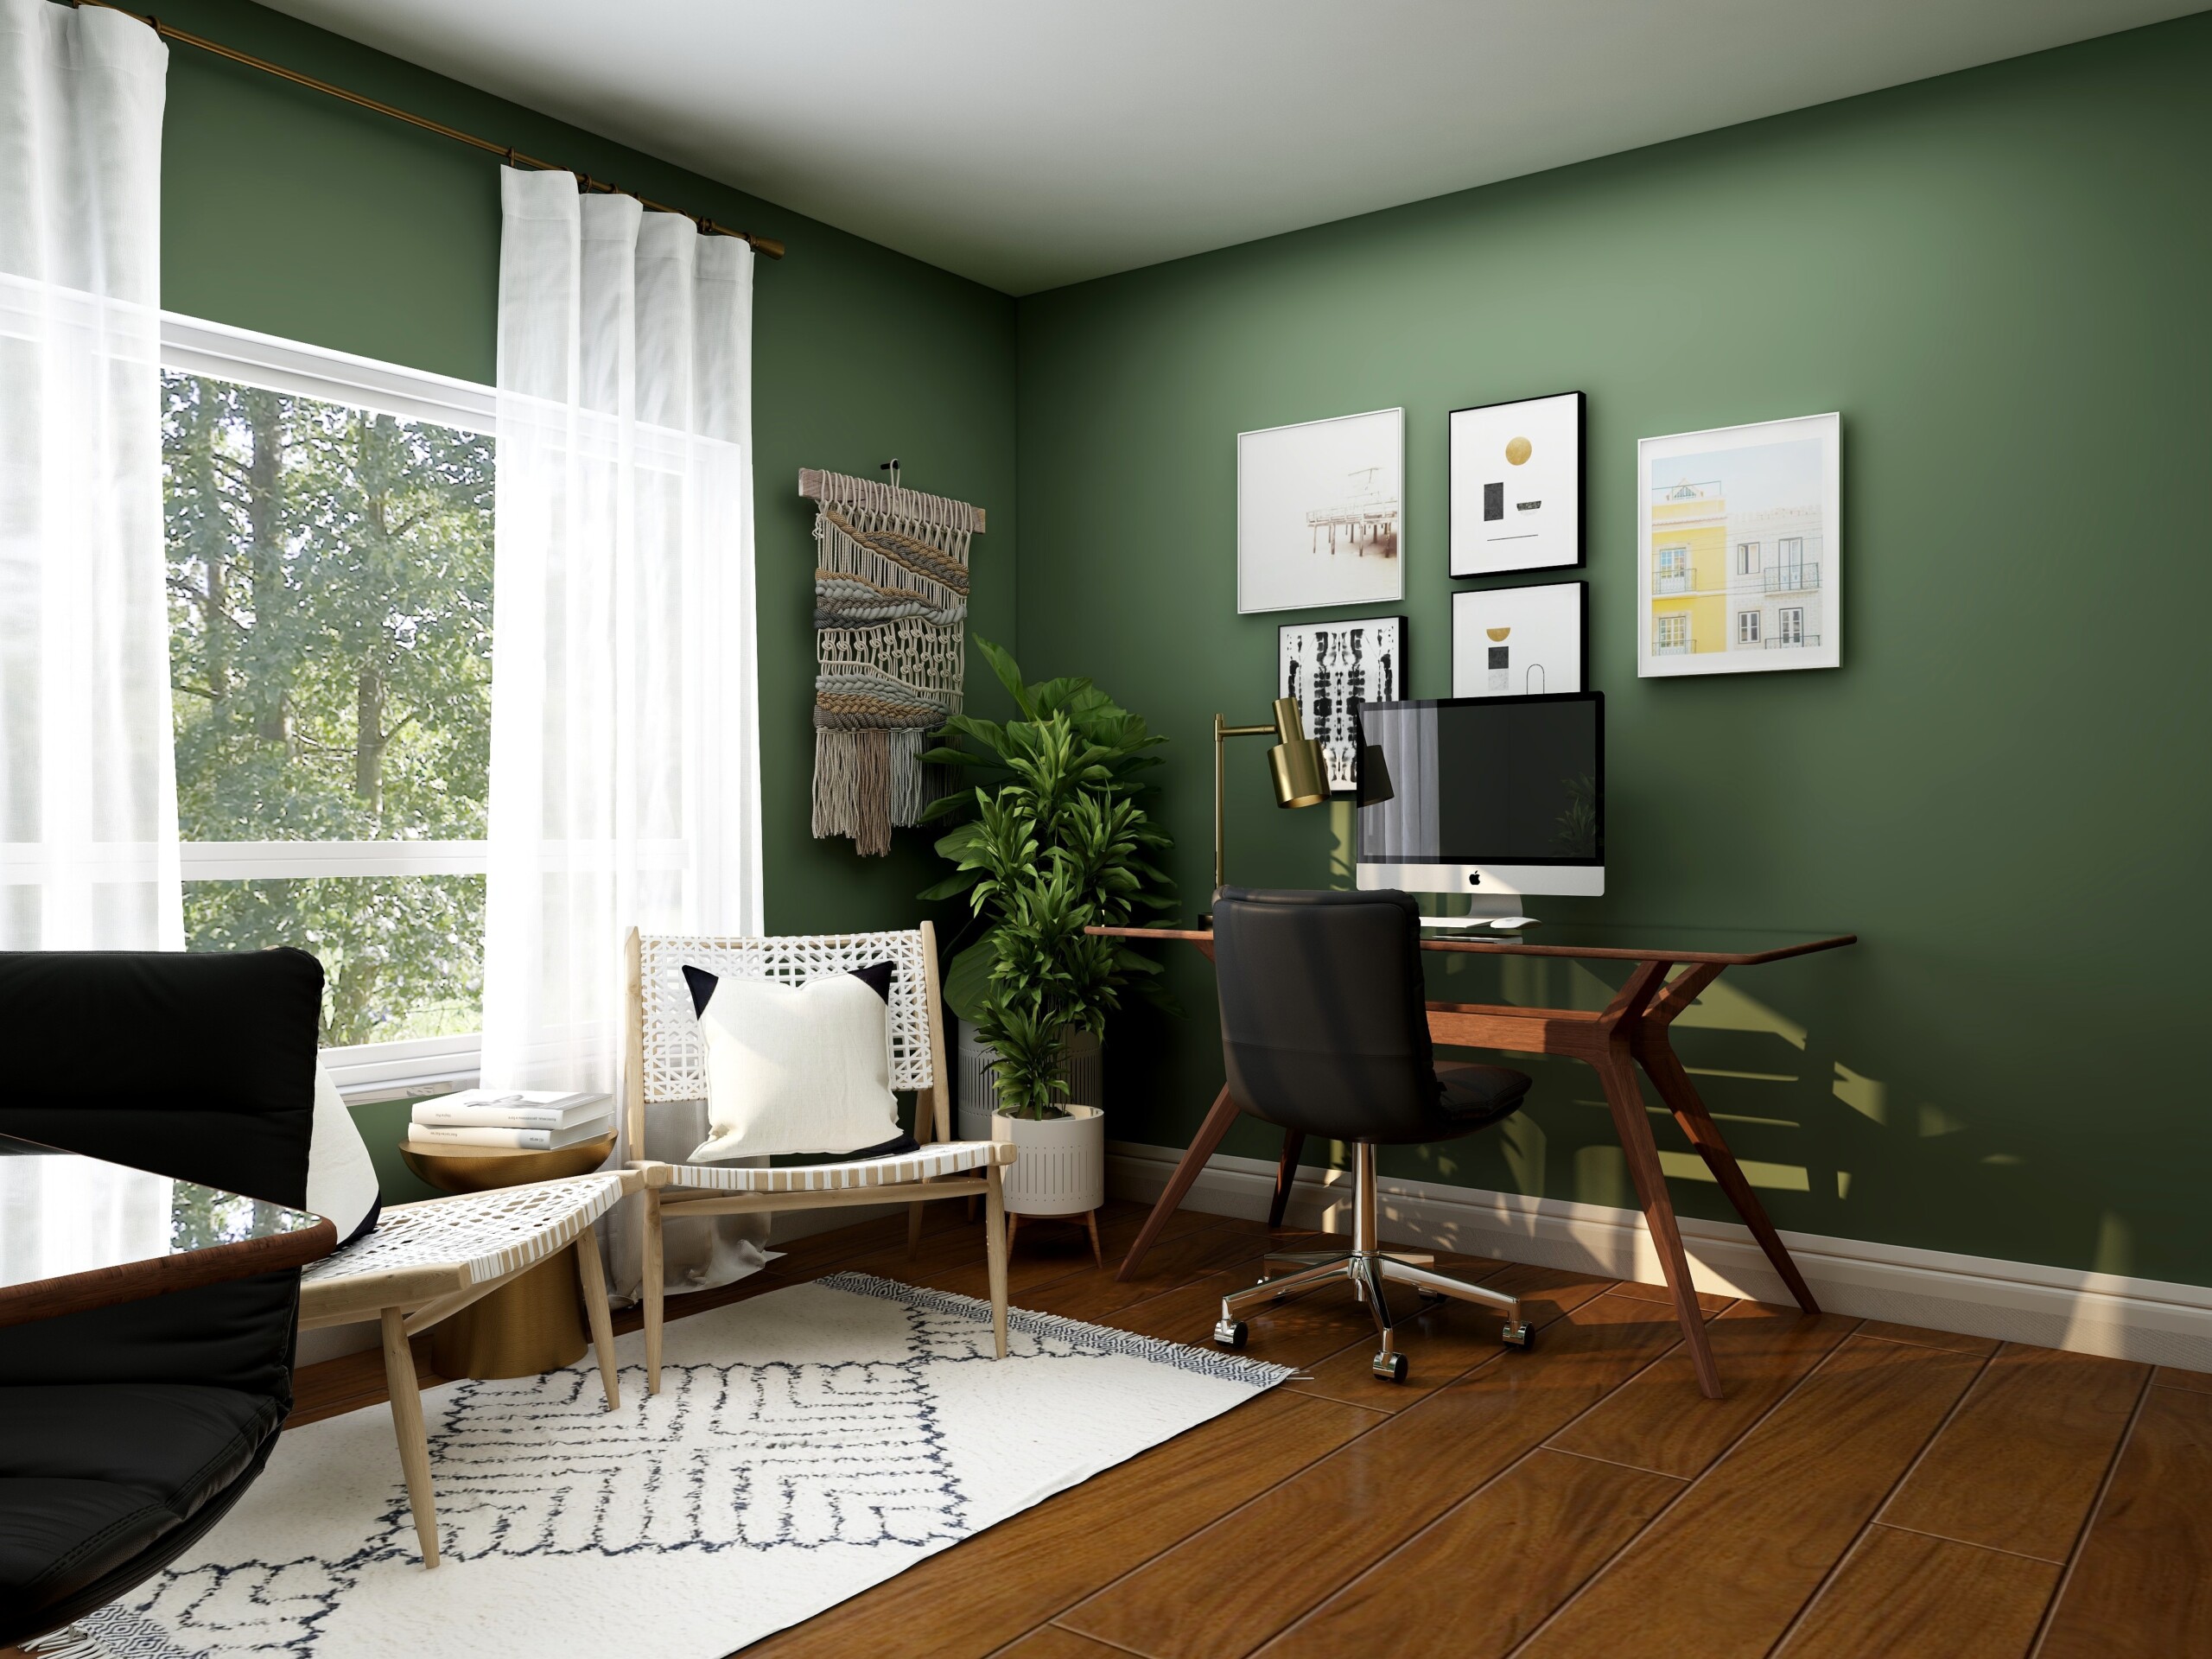 How Can I Design A Home Office That Promotes Creativity And Inspiration?